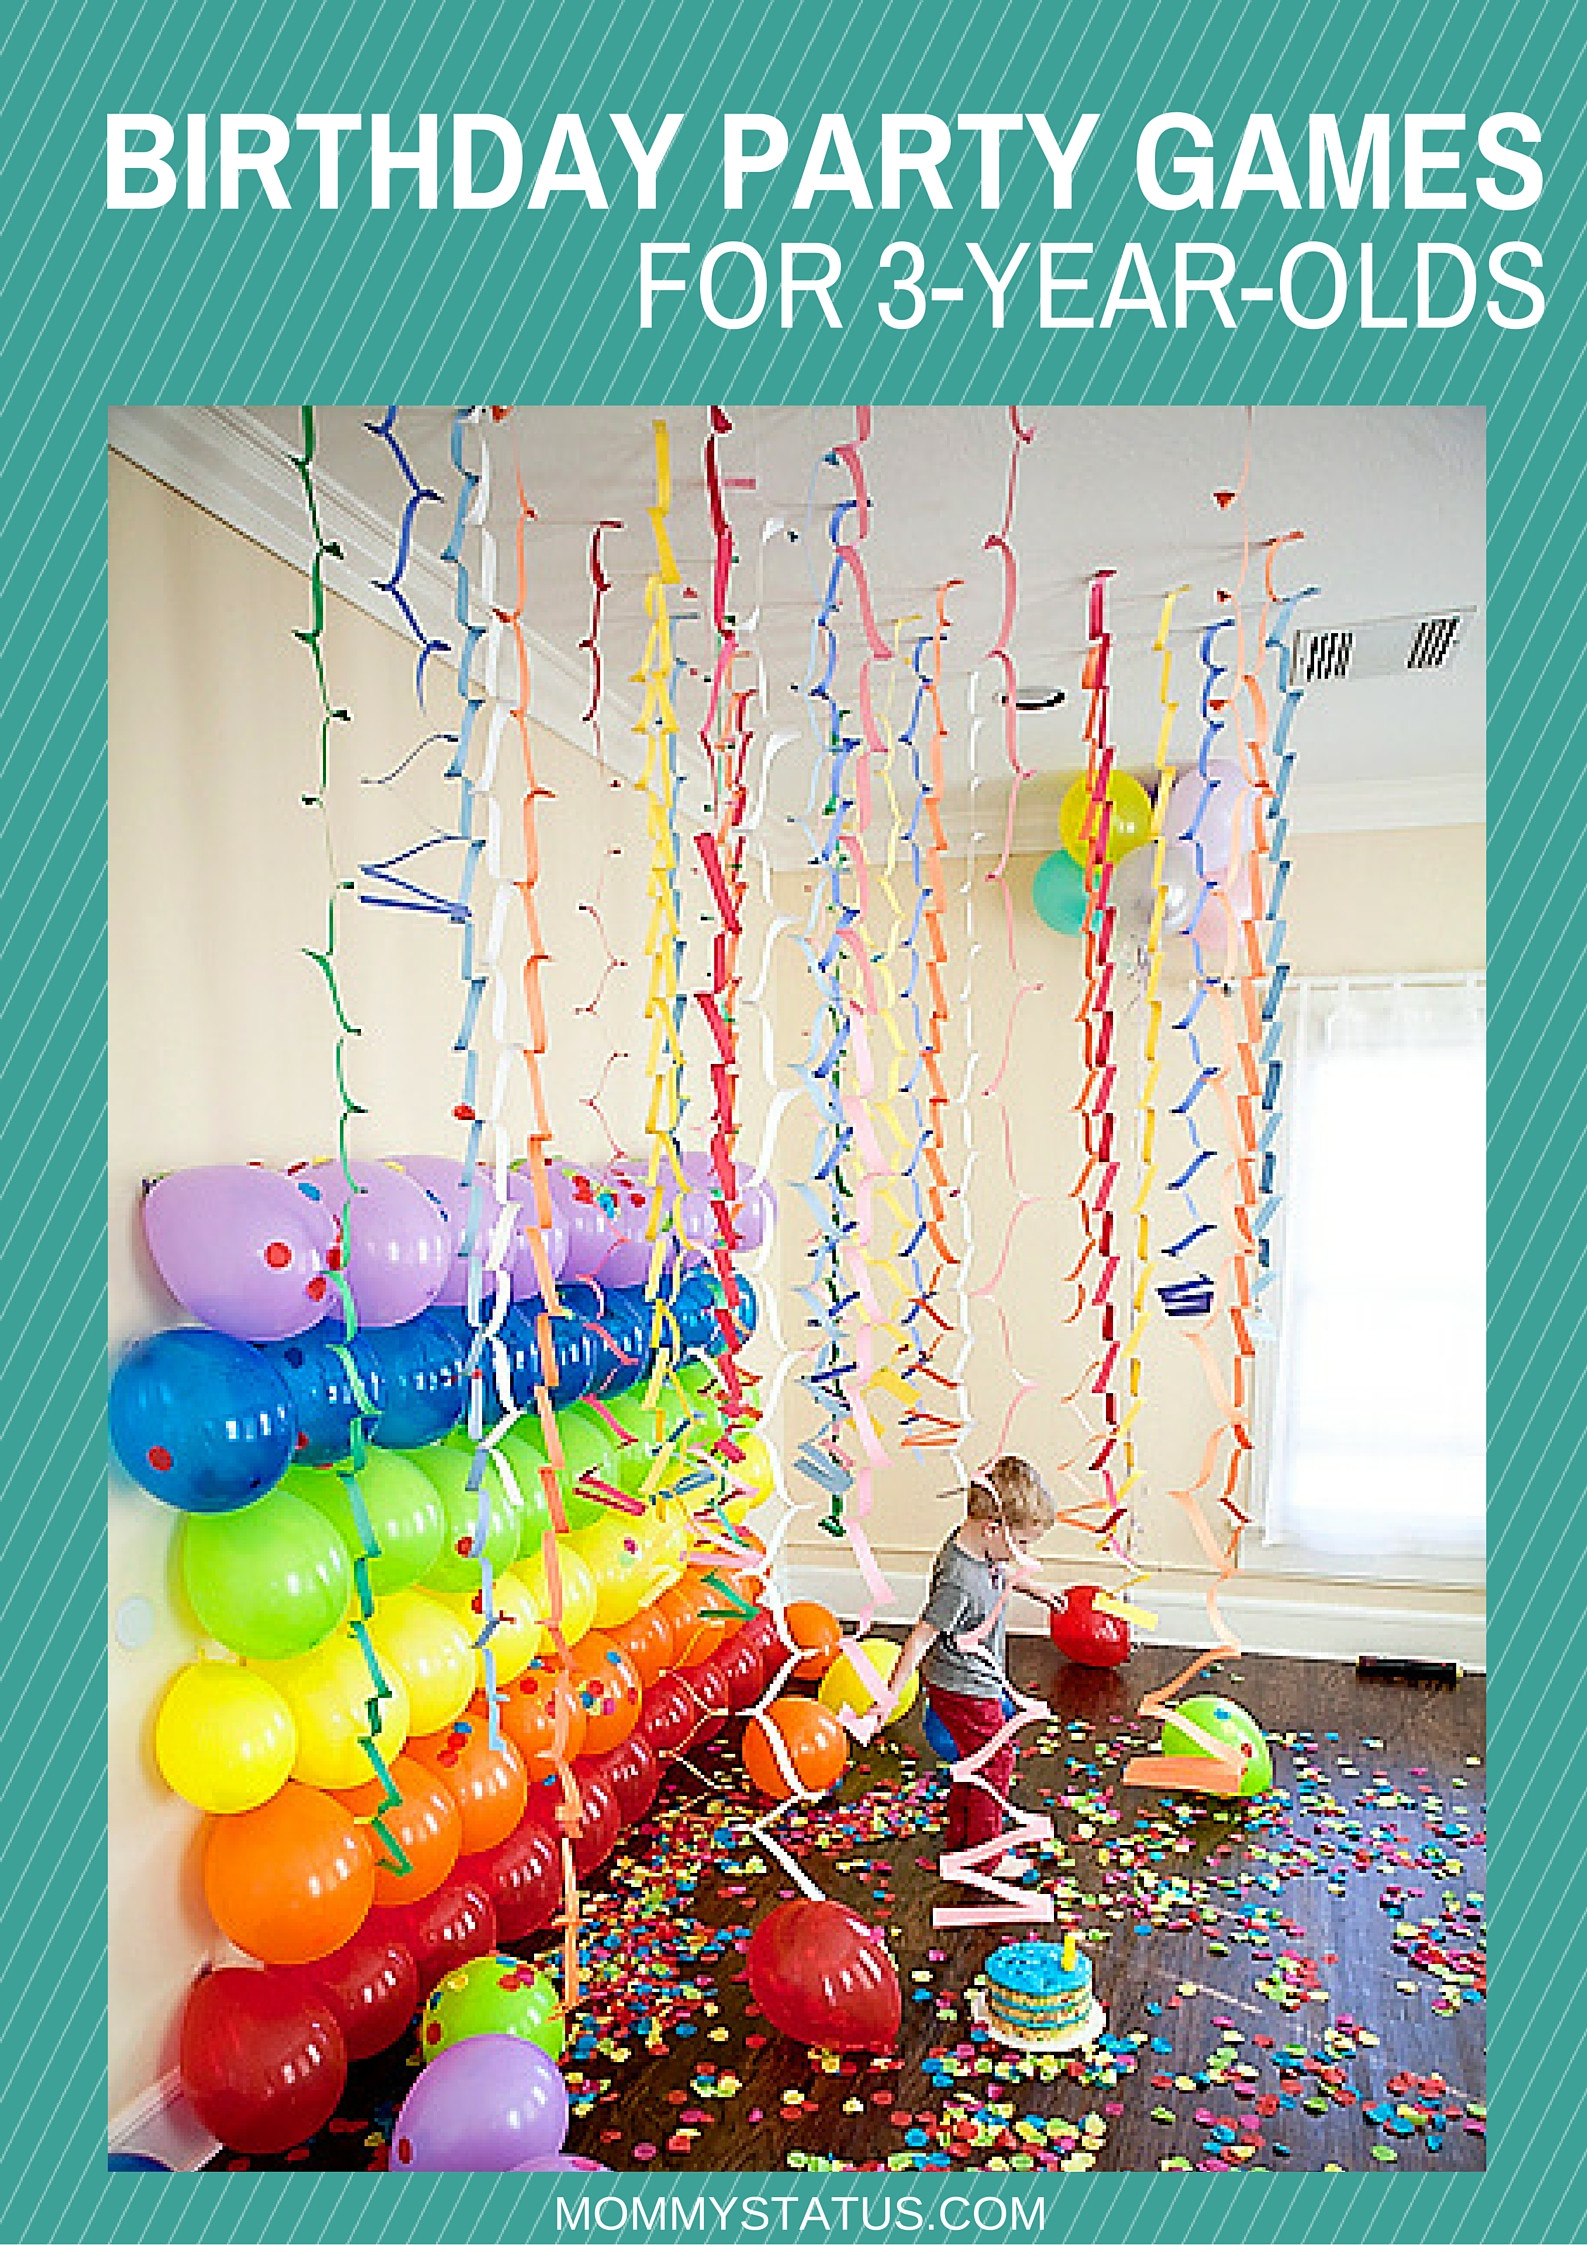 Birthday Party Games
 BIRTHDAY PARTY GAMES FOR 3 YEAR OLDS Mommy Status